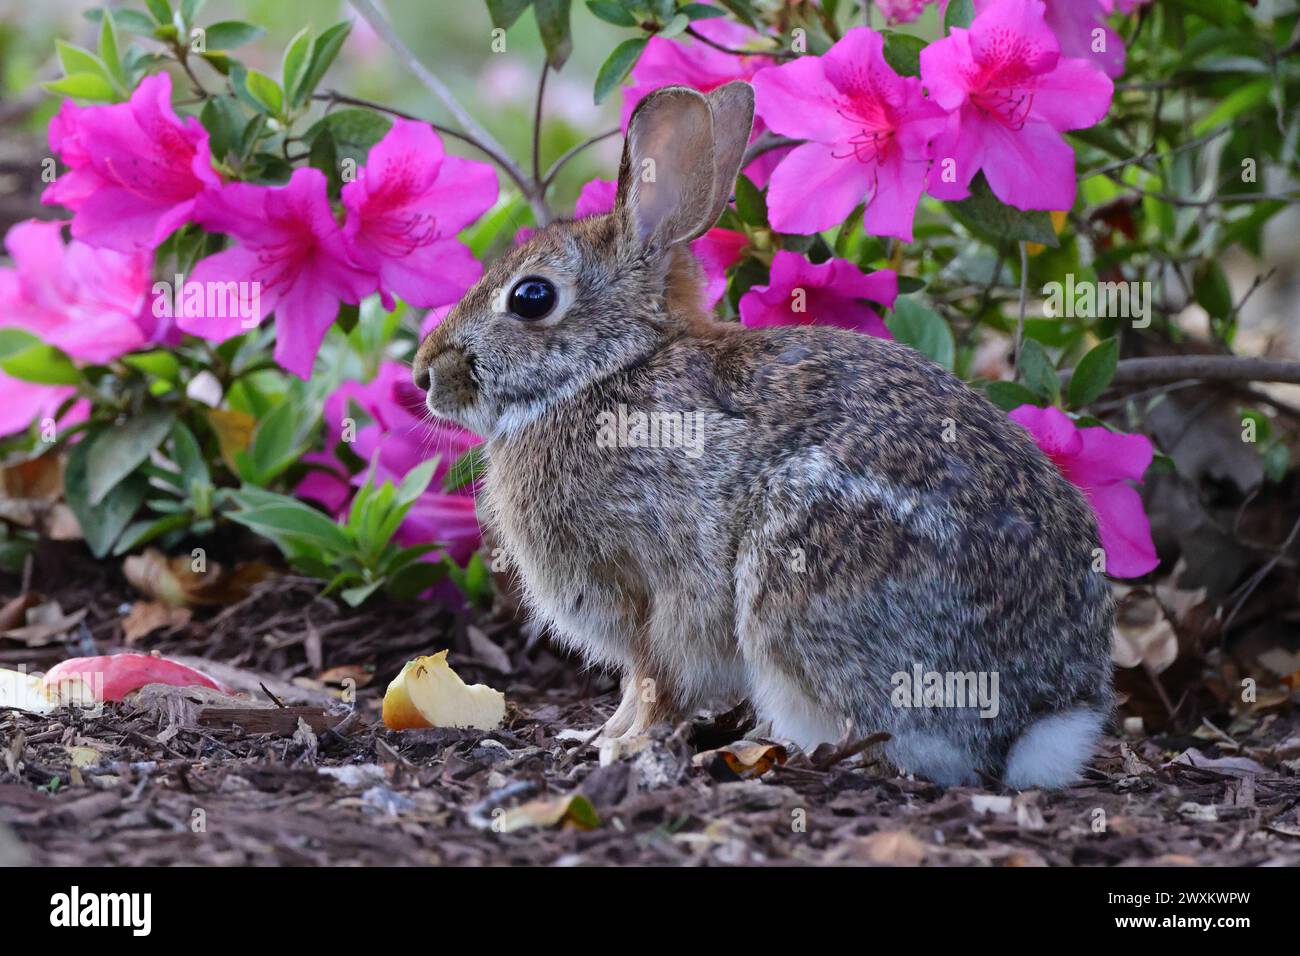 A rabbit sitting beside flowers on the ground Stock Photo